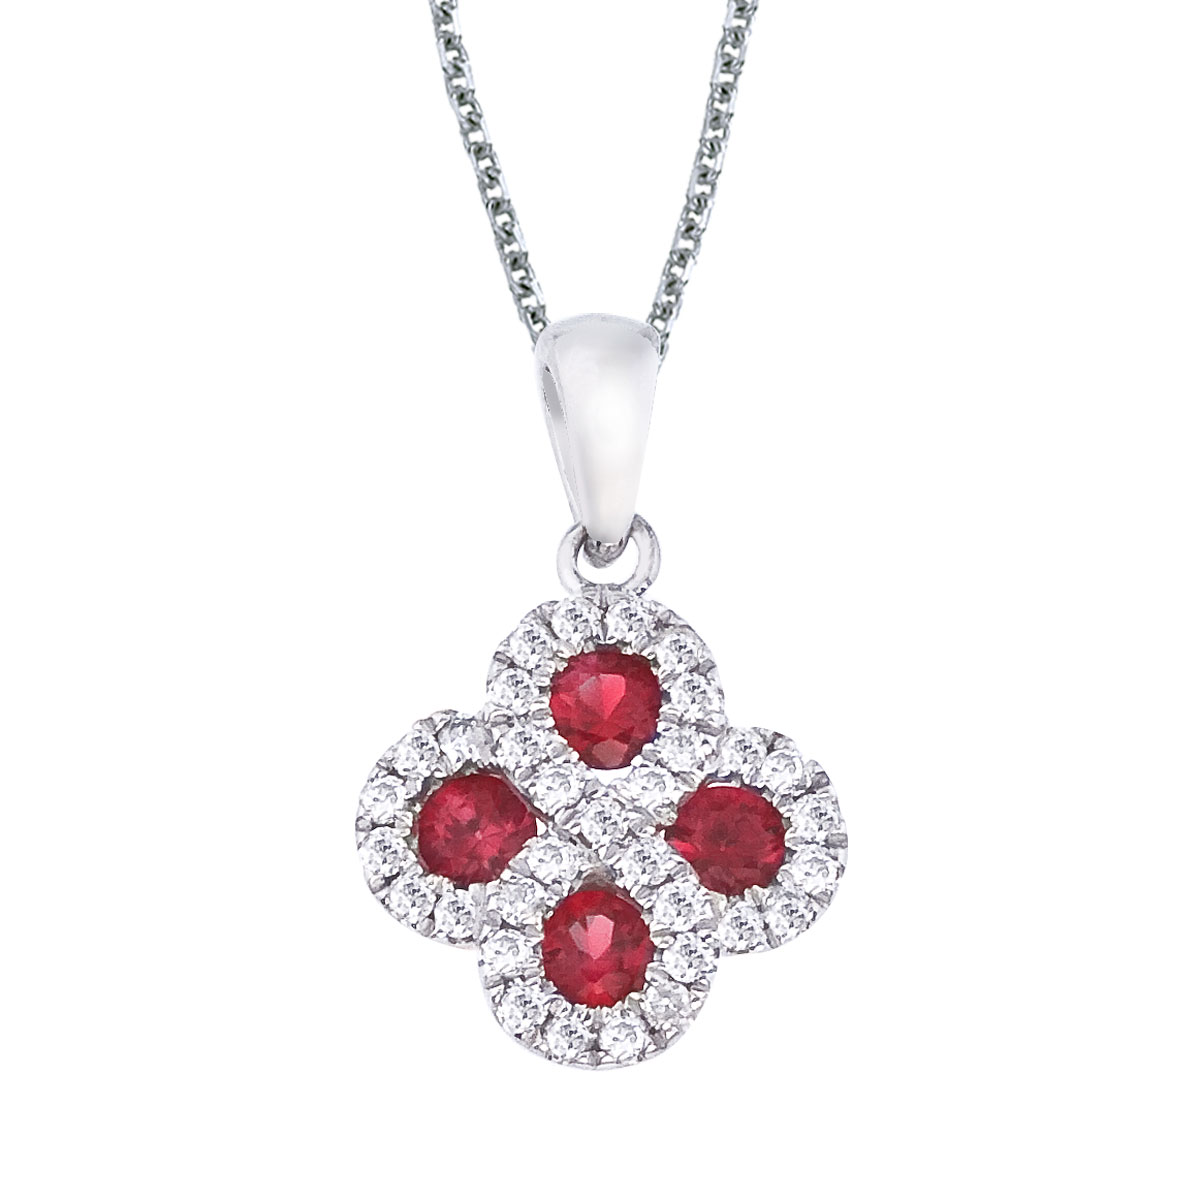 This 14k white gold clover shape pendant contains four 2.7 mm rubies surrounded by .13 carats of ...